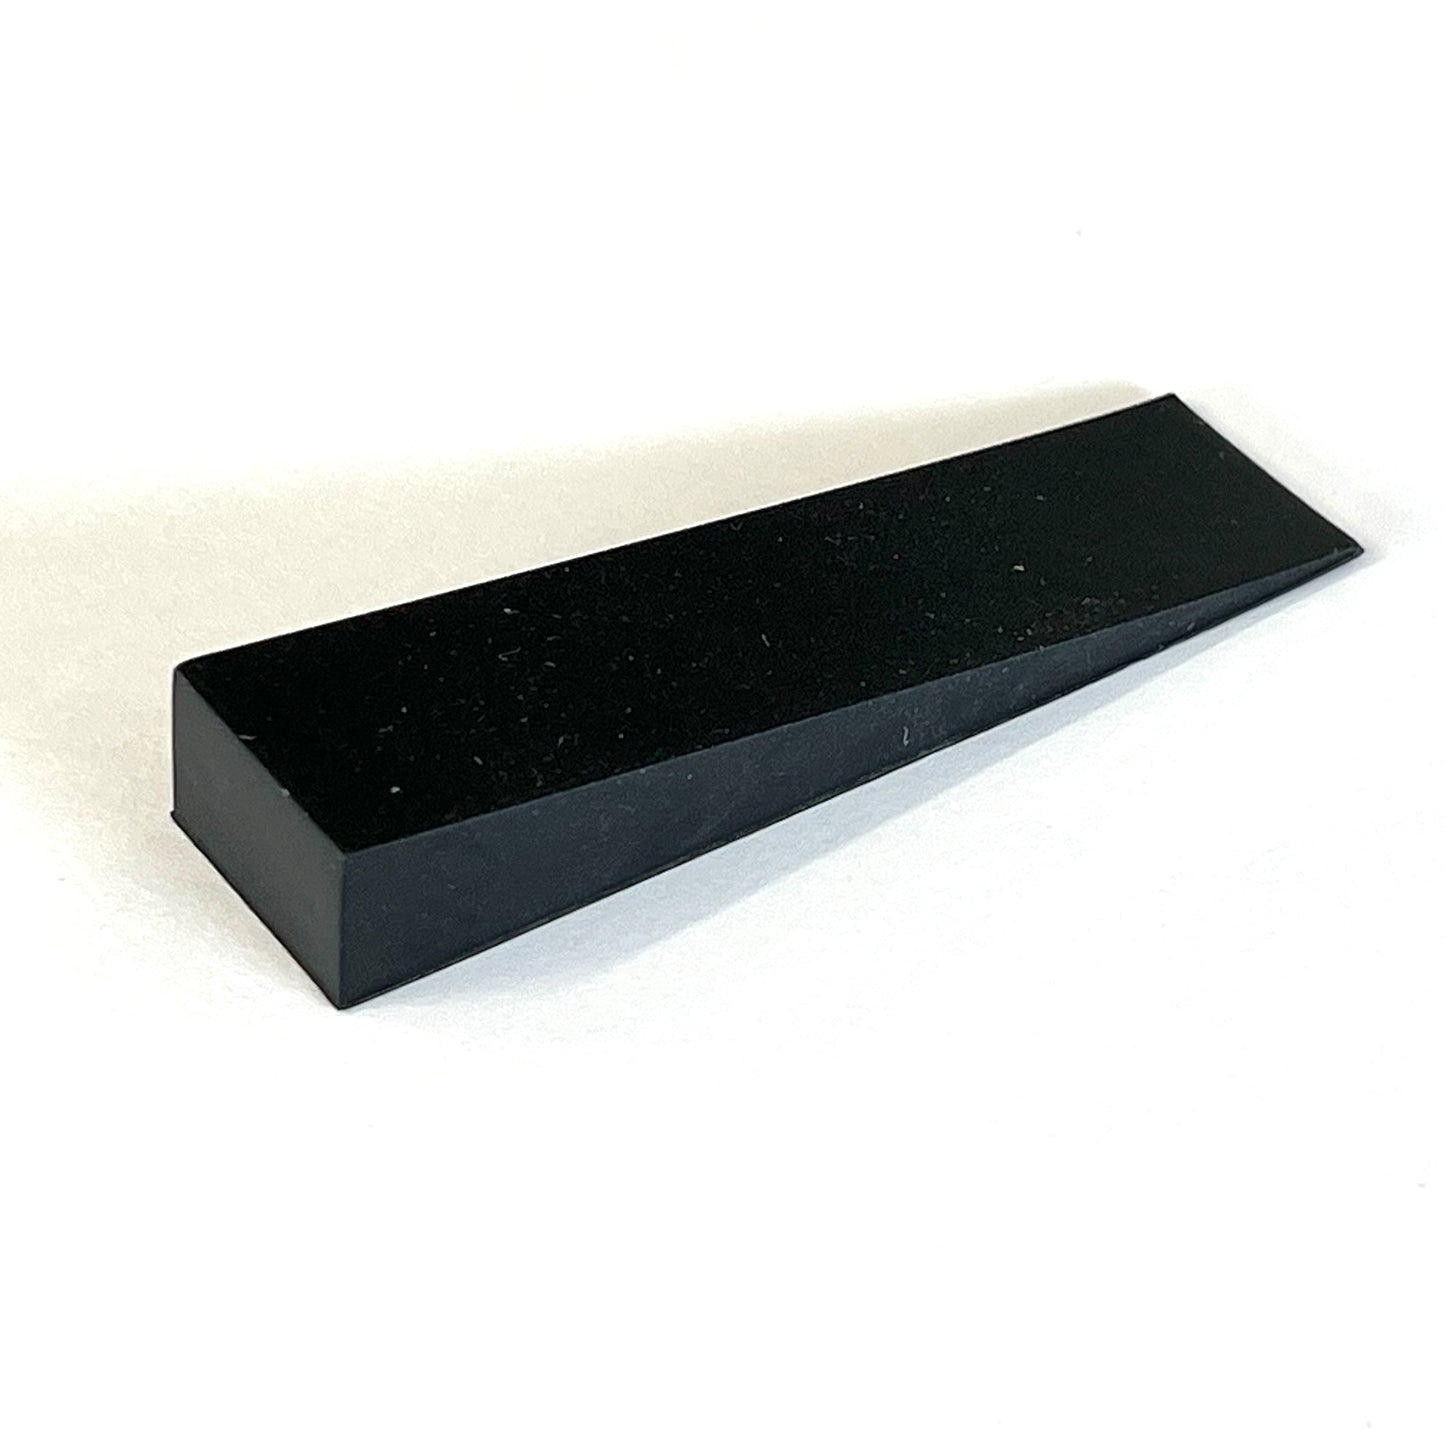 Rubber wedge mute, 3" x ¾"